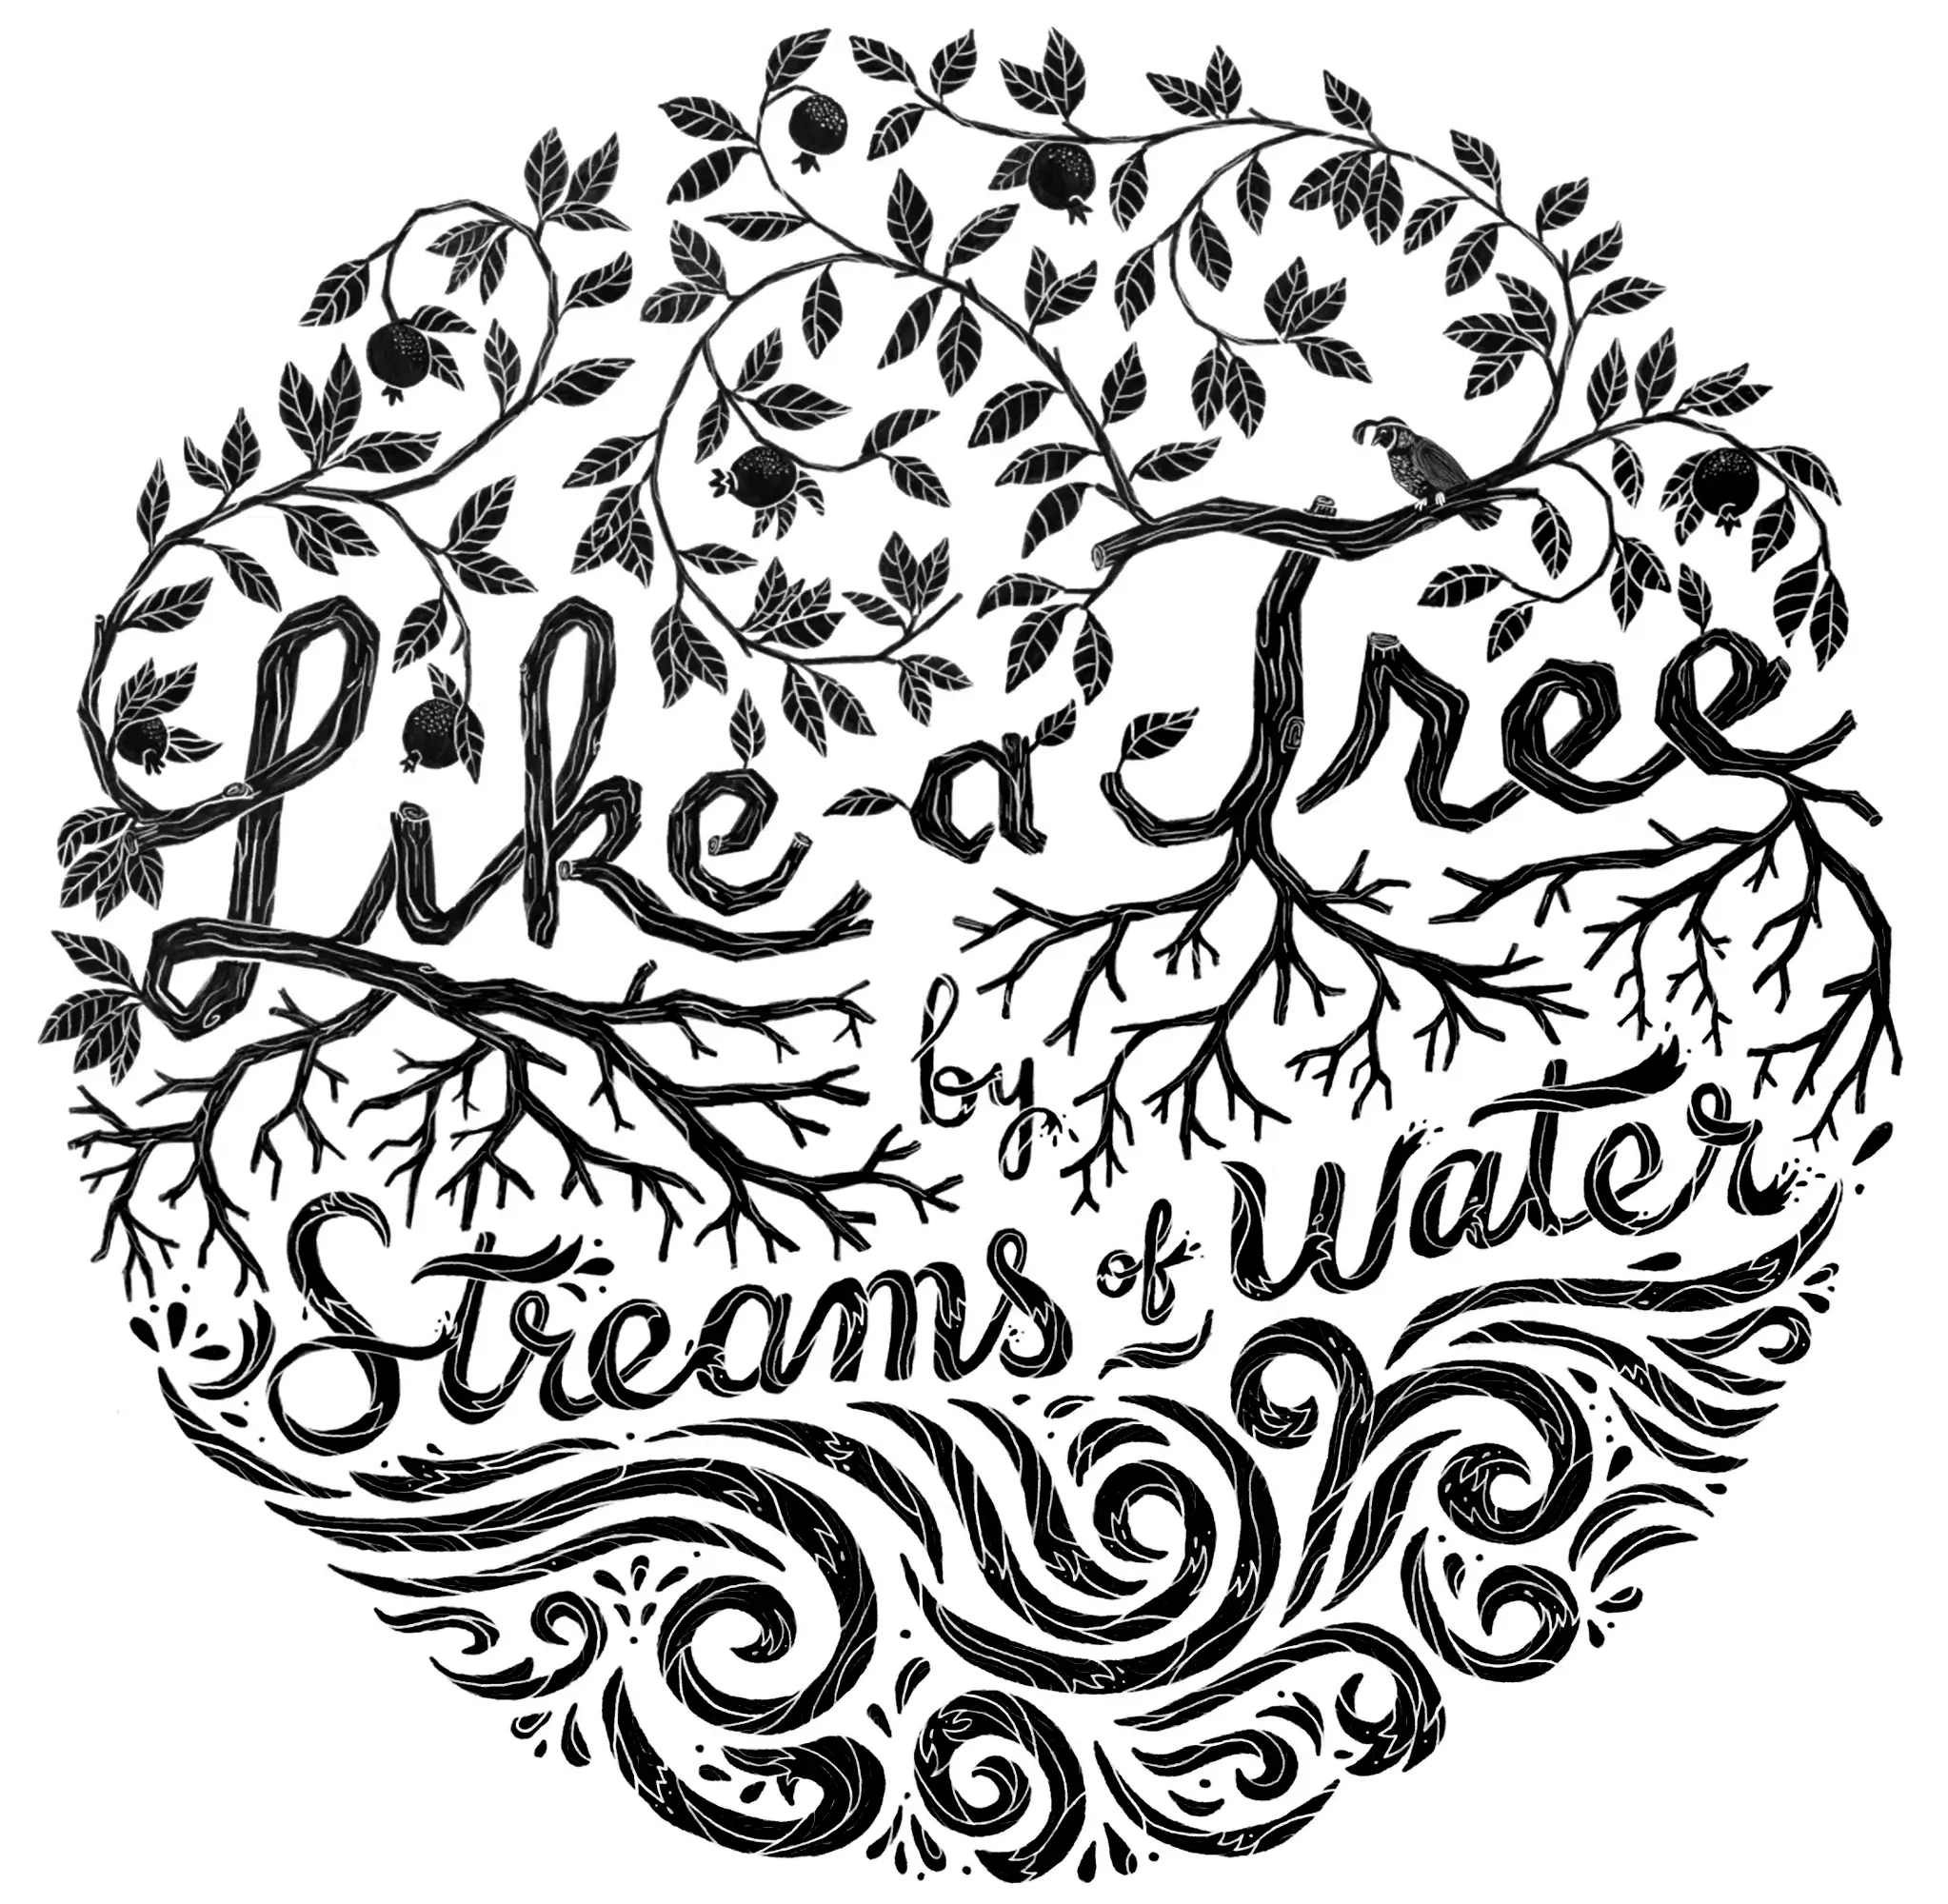 Like a tree by streams of water Lettering by Eric Crow